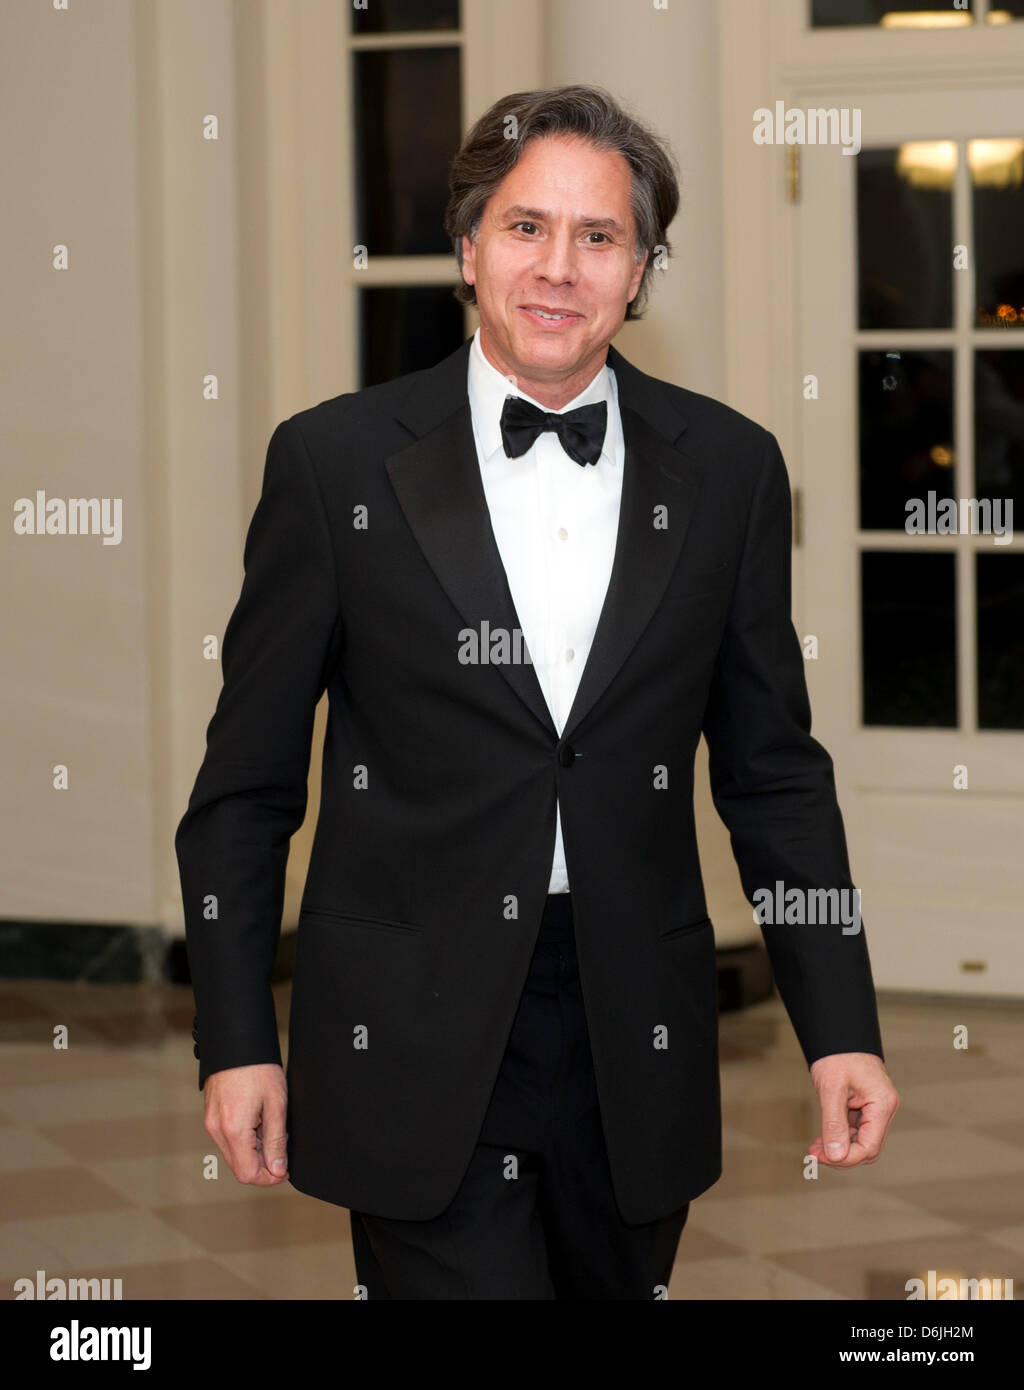 Antony Blinken, Deputy Assistant to the President and National Security Advisor, Office of the Vice President, arrives for the Official Dinner in honor of Prime Minister David Cameron of Great Britain and his wife, Samantha, at the White House in Washington, D.C., USA, 14 March 2012. Photo: Ron Sachs / CNP.(RESTRICTION: NO New York or New Jersey Newspapers or newspapers within a 75 Stock Photo